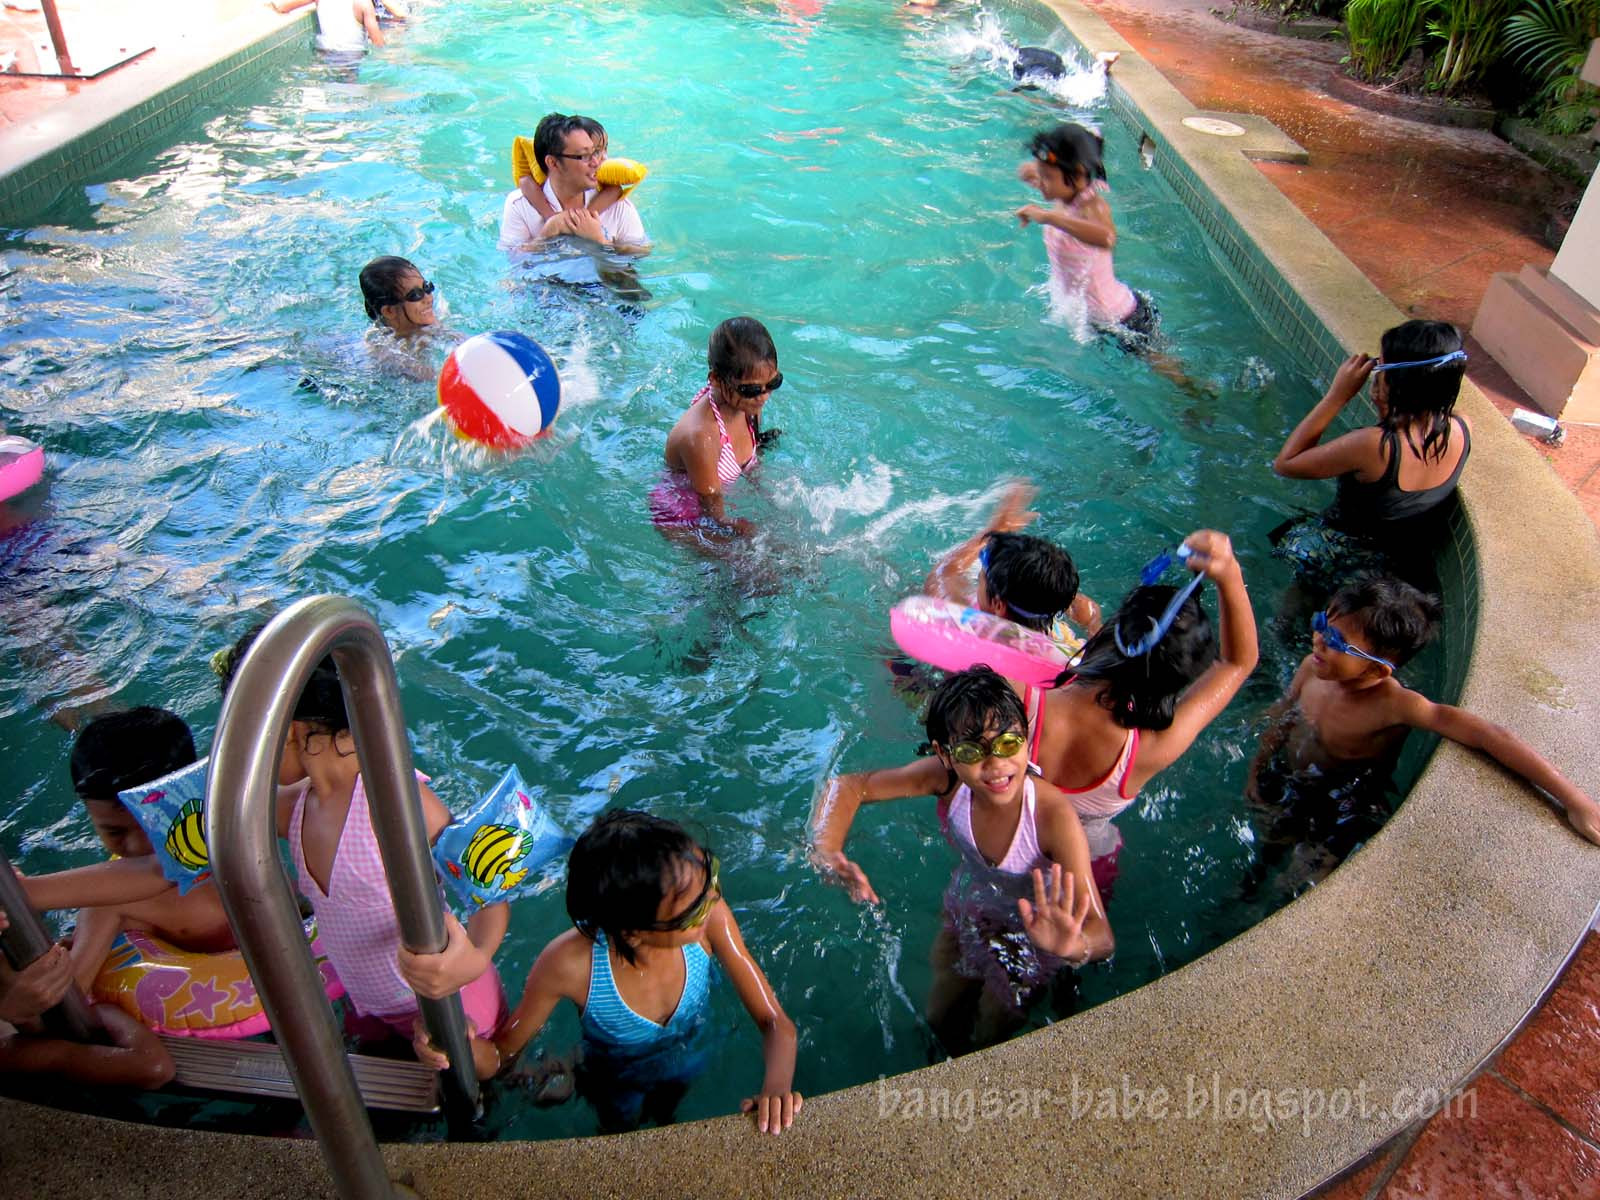 Kids Party Places In Maryland
 Pool Party for Myanmar Kids Bangsar Babe